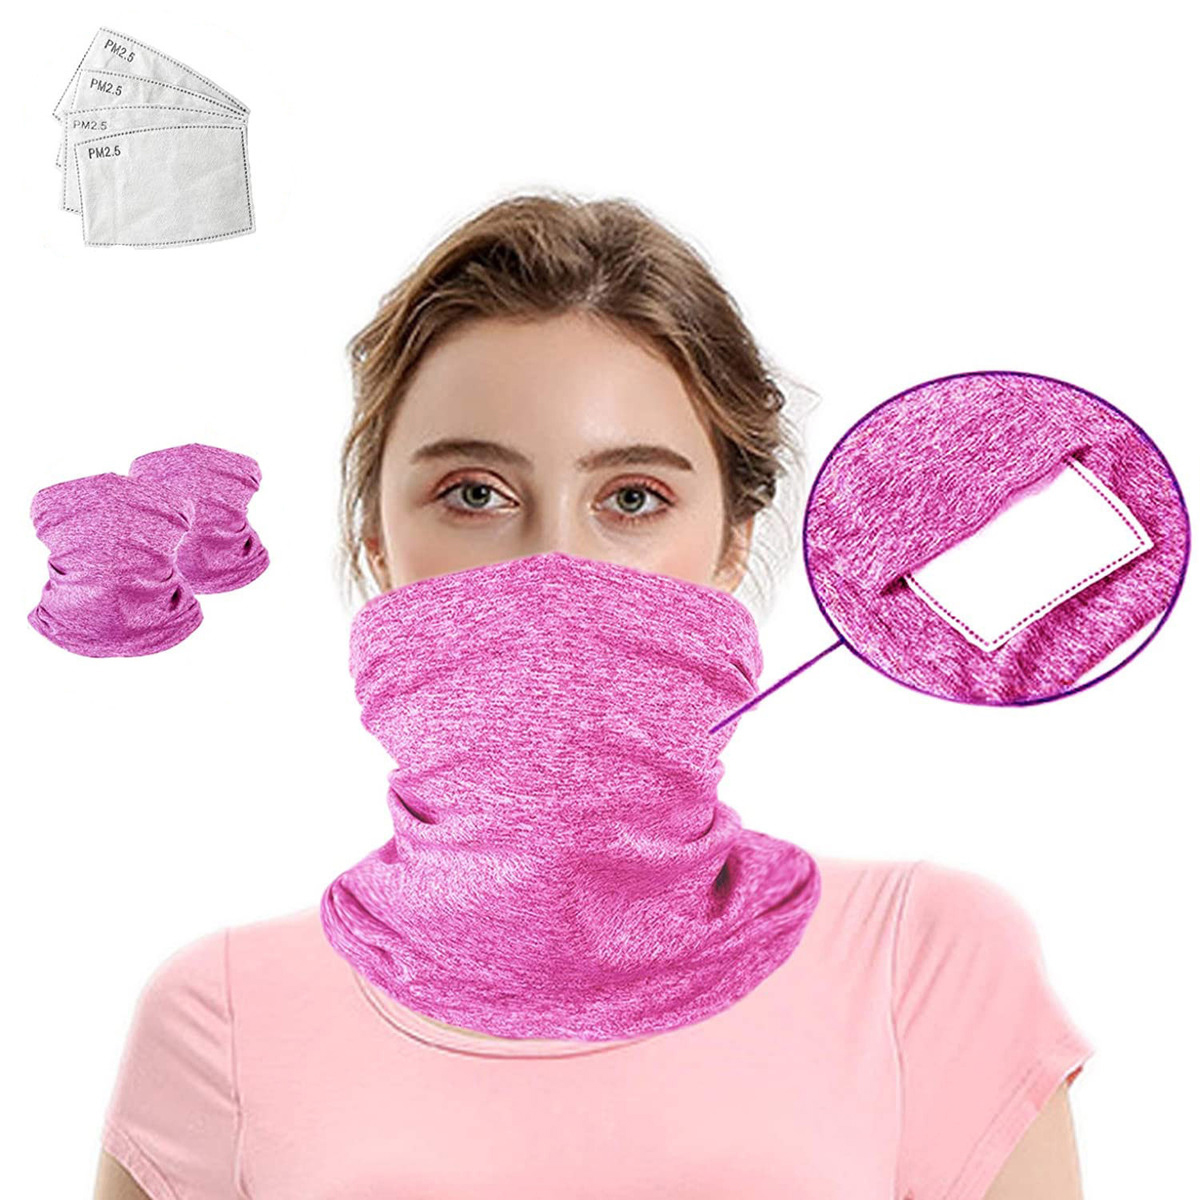 Outdoor-Dustproof-Breathable-Sport-Head-Scarves-Face-Mask-With-5-Filter-Pads-Windproof-PM25-Sunscree-1683314-7